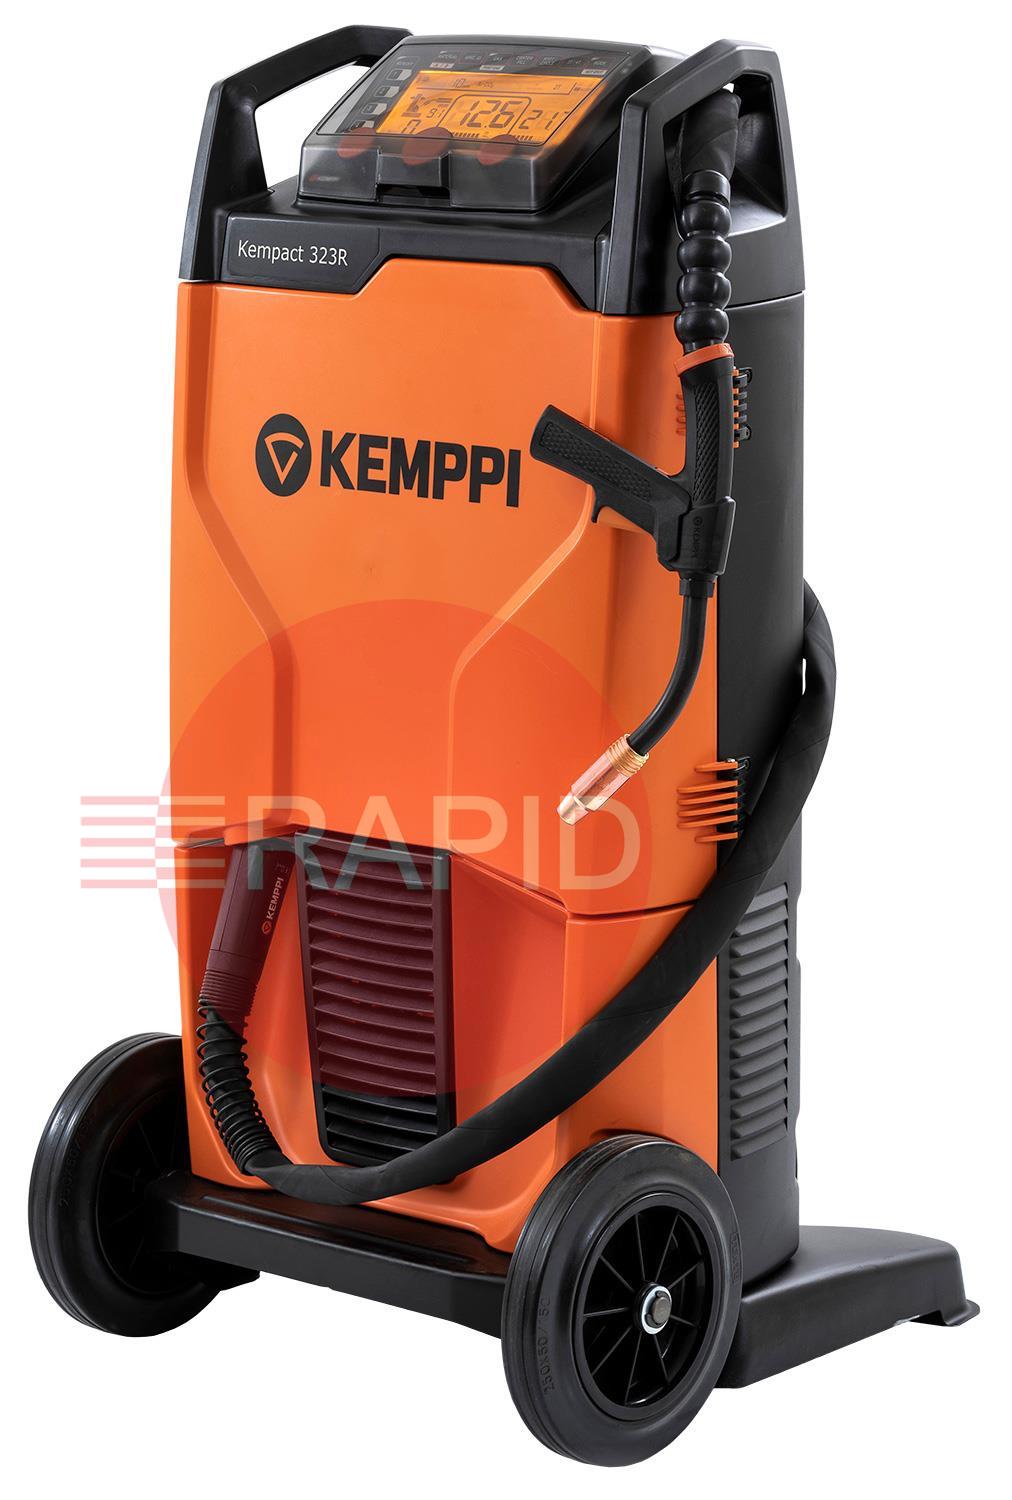 P2229GXE  Kemppi Kempact RA 323R, 320A 3 Phase 400v Mig Welder, with Flexlite GXe 305G 3.5m Torch